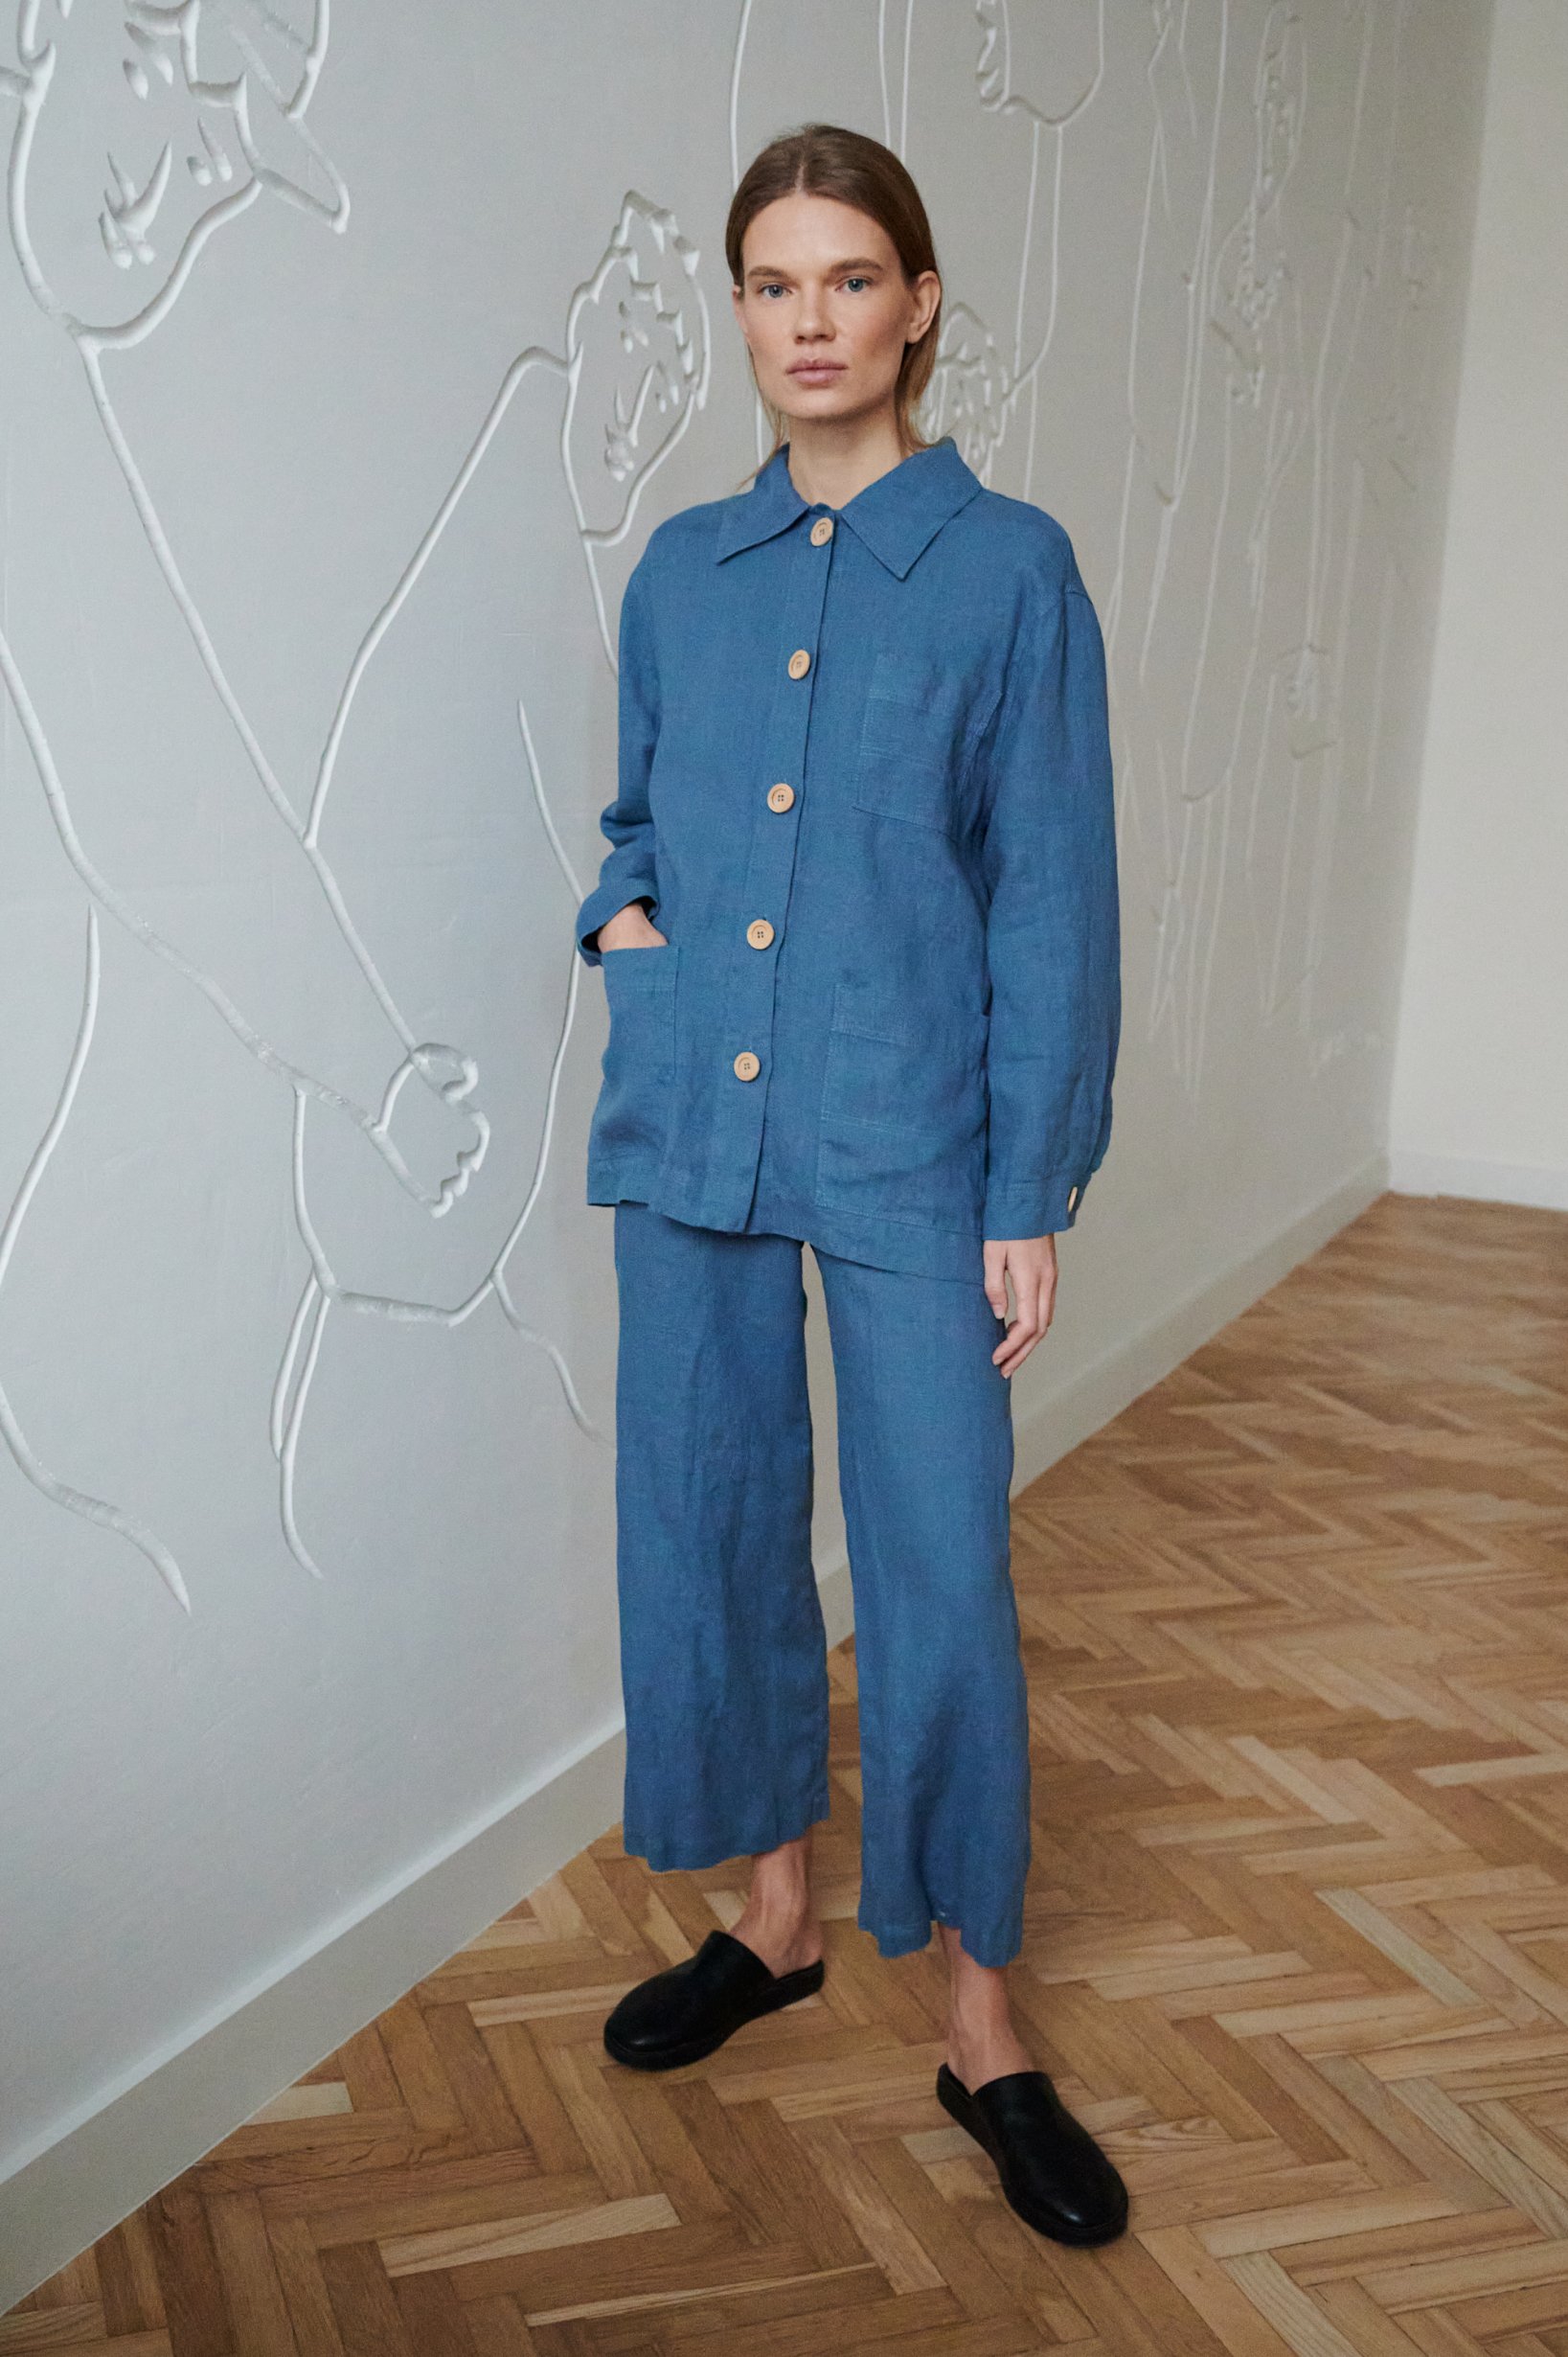 Blue wide-leg linen trousers paired with a matching linen utility jacket